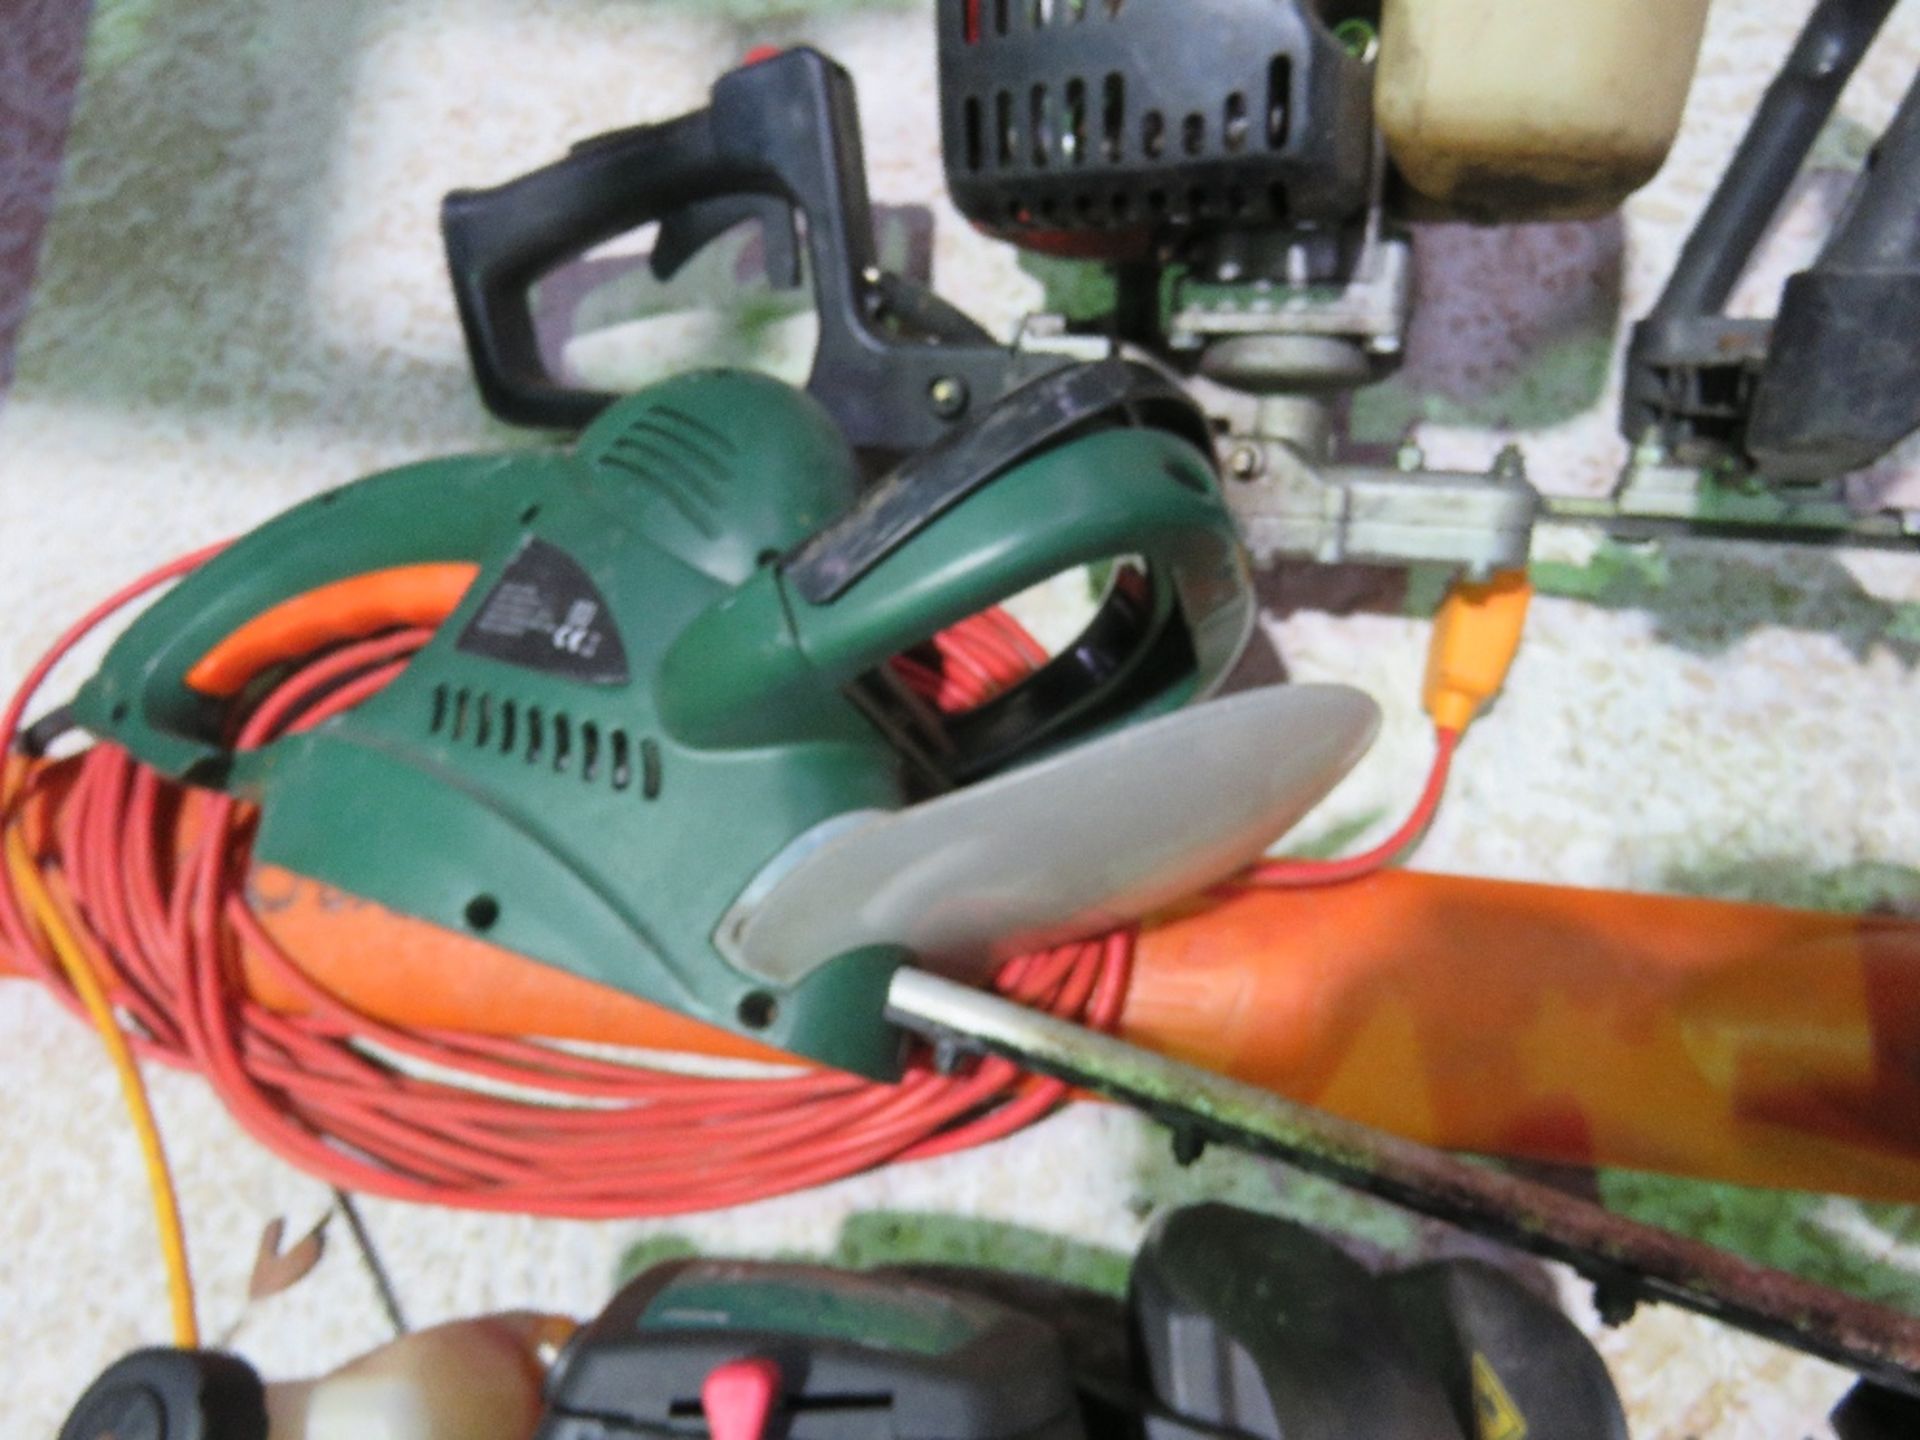 2 X PETROL HEDGE CUTTERS PLUS 2 X ELECTRIC HEDGE CUTTERS AND A CHAINSAW SHARPENER. - Image 7 of 14